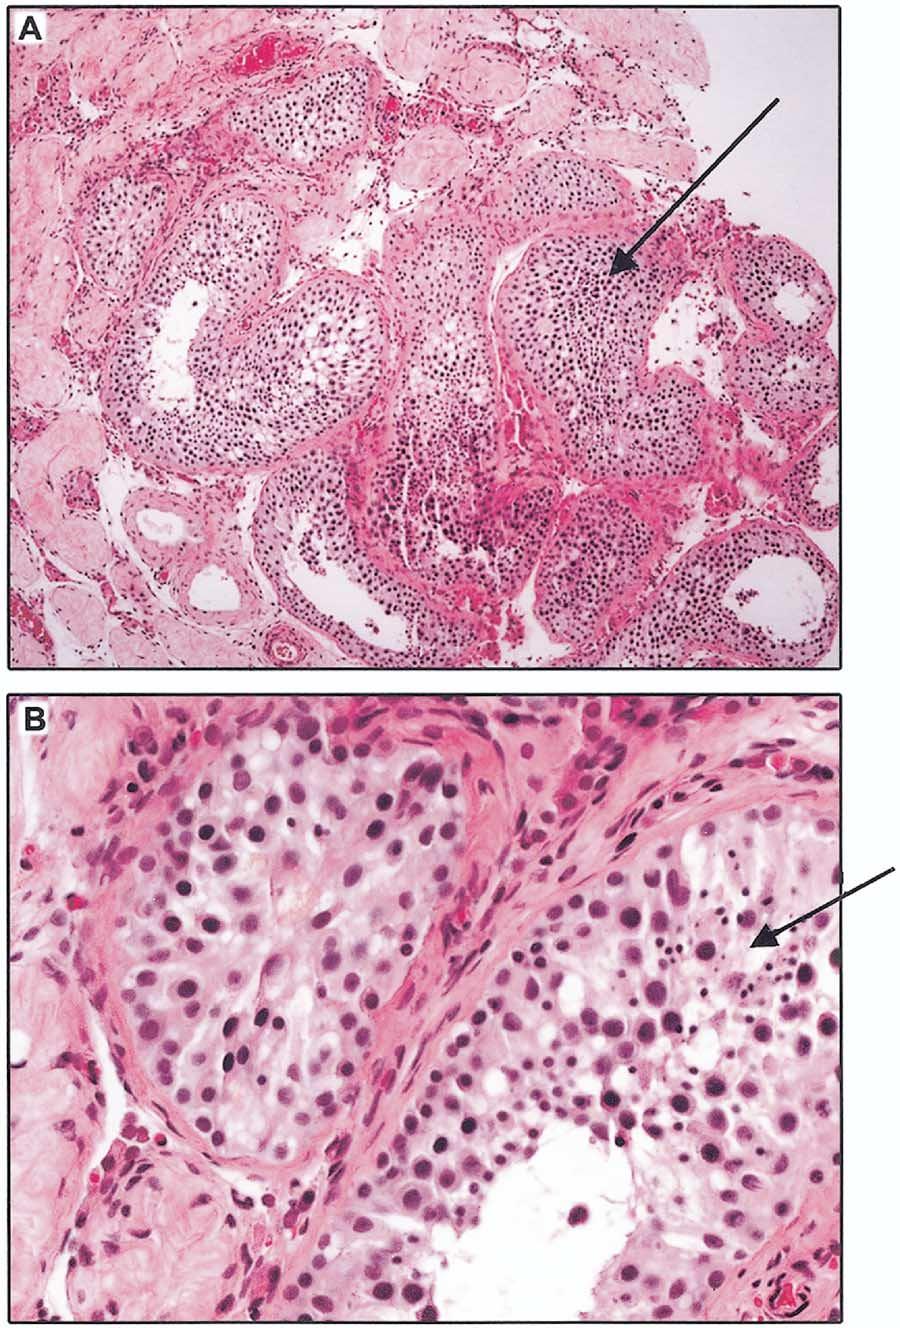 FIGURE 1 Examples of mixed testicular histology that resulted in changes in clinical care.